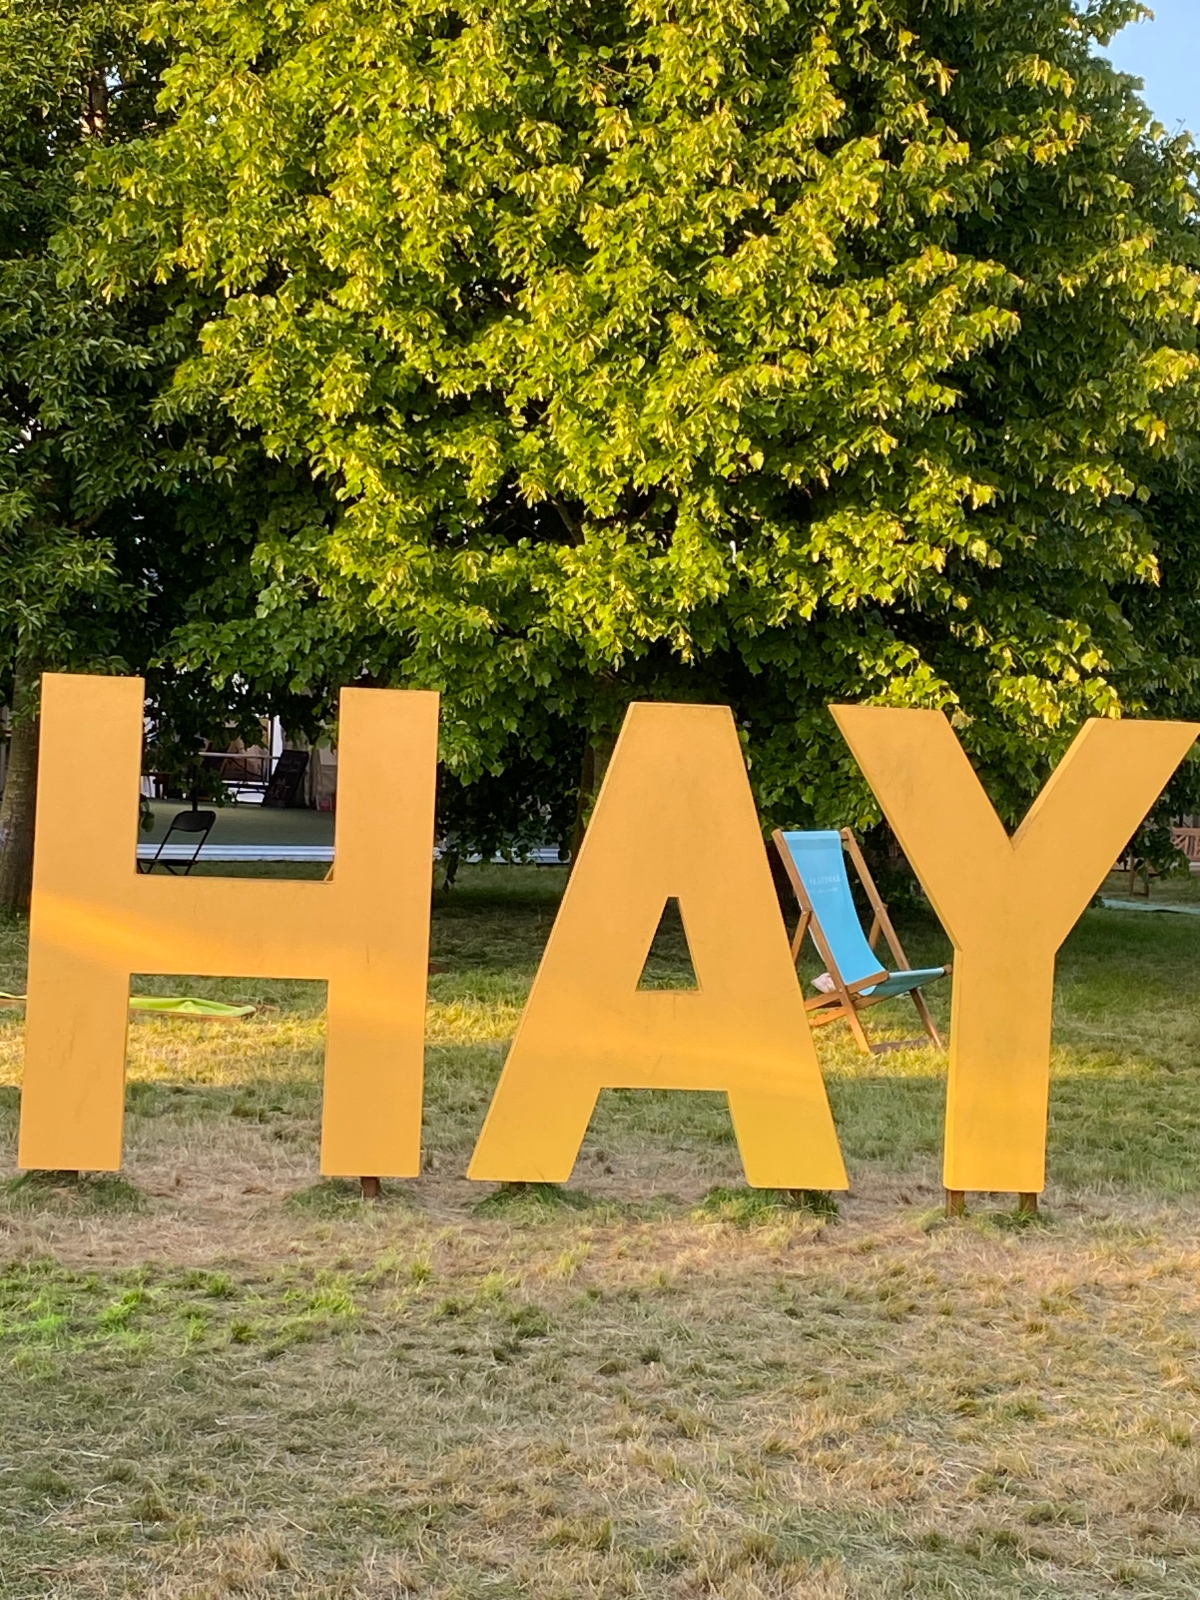 At the Hay Festival 2023